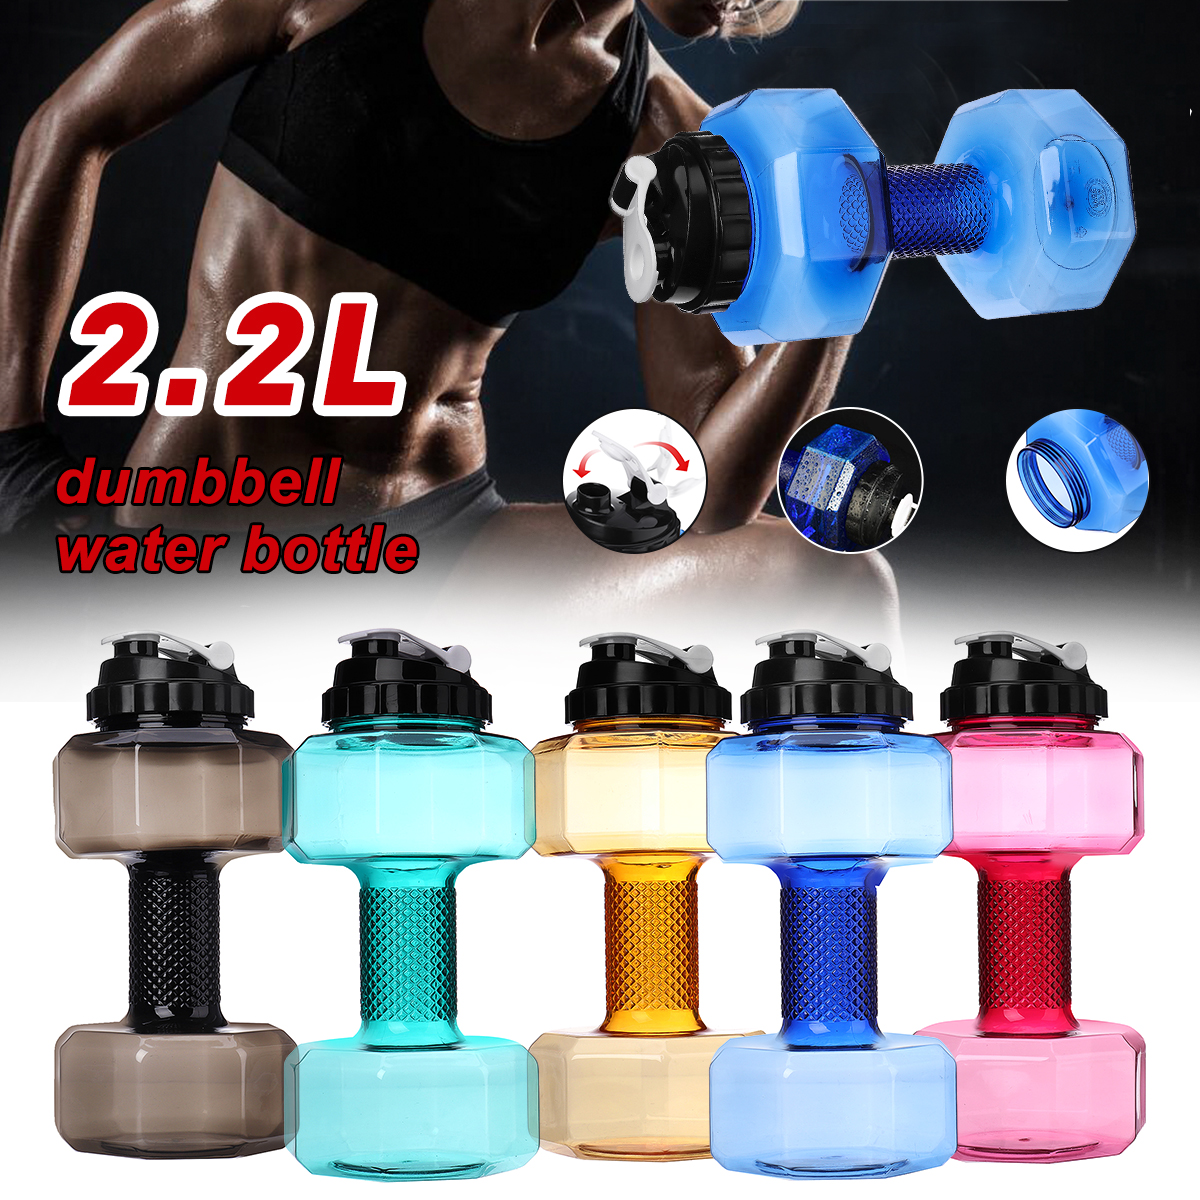 22L-Large-Dumbbell-Shape-Water-Cup-Kettle-Portable-Sport-Gym-Fitness-Bottle-1680181-1